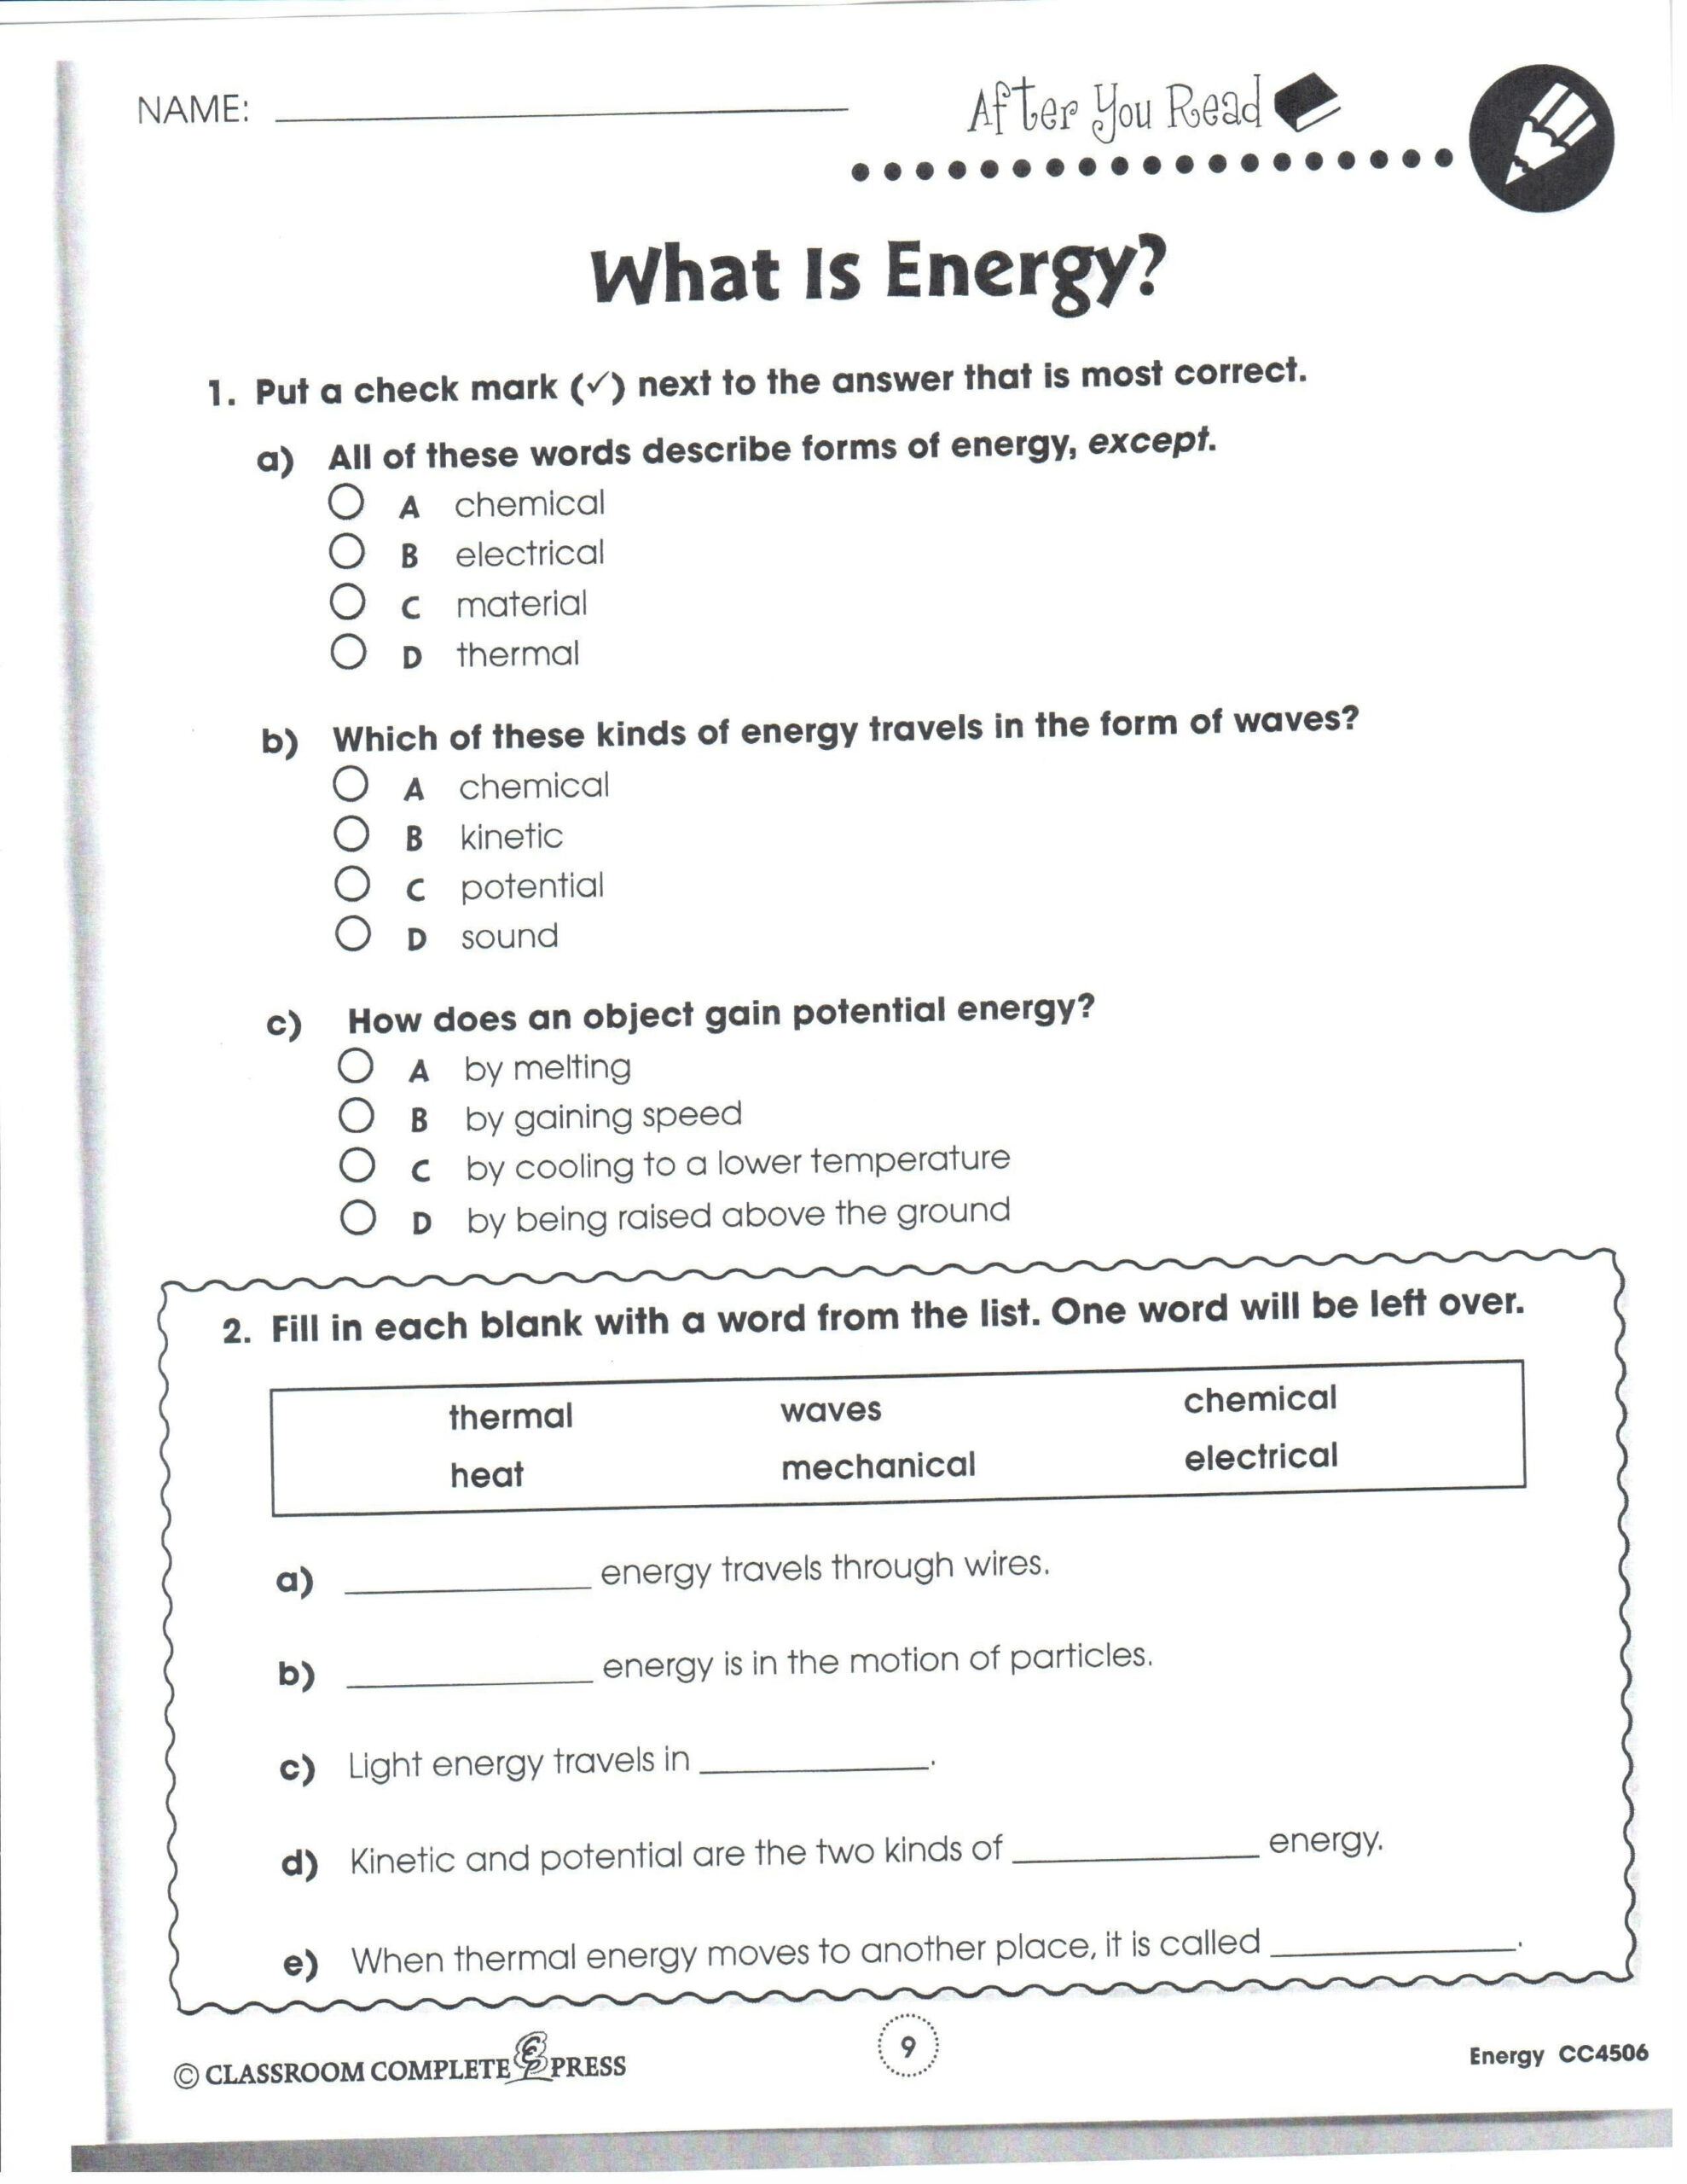 This Is A Reading Comprehension Worksheet Intended To Help Readers 